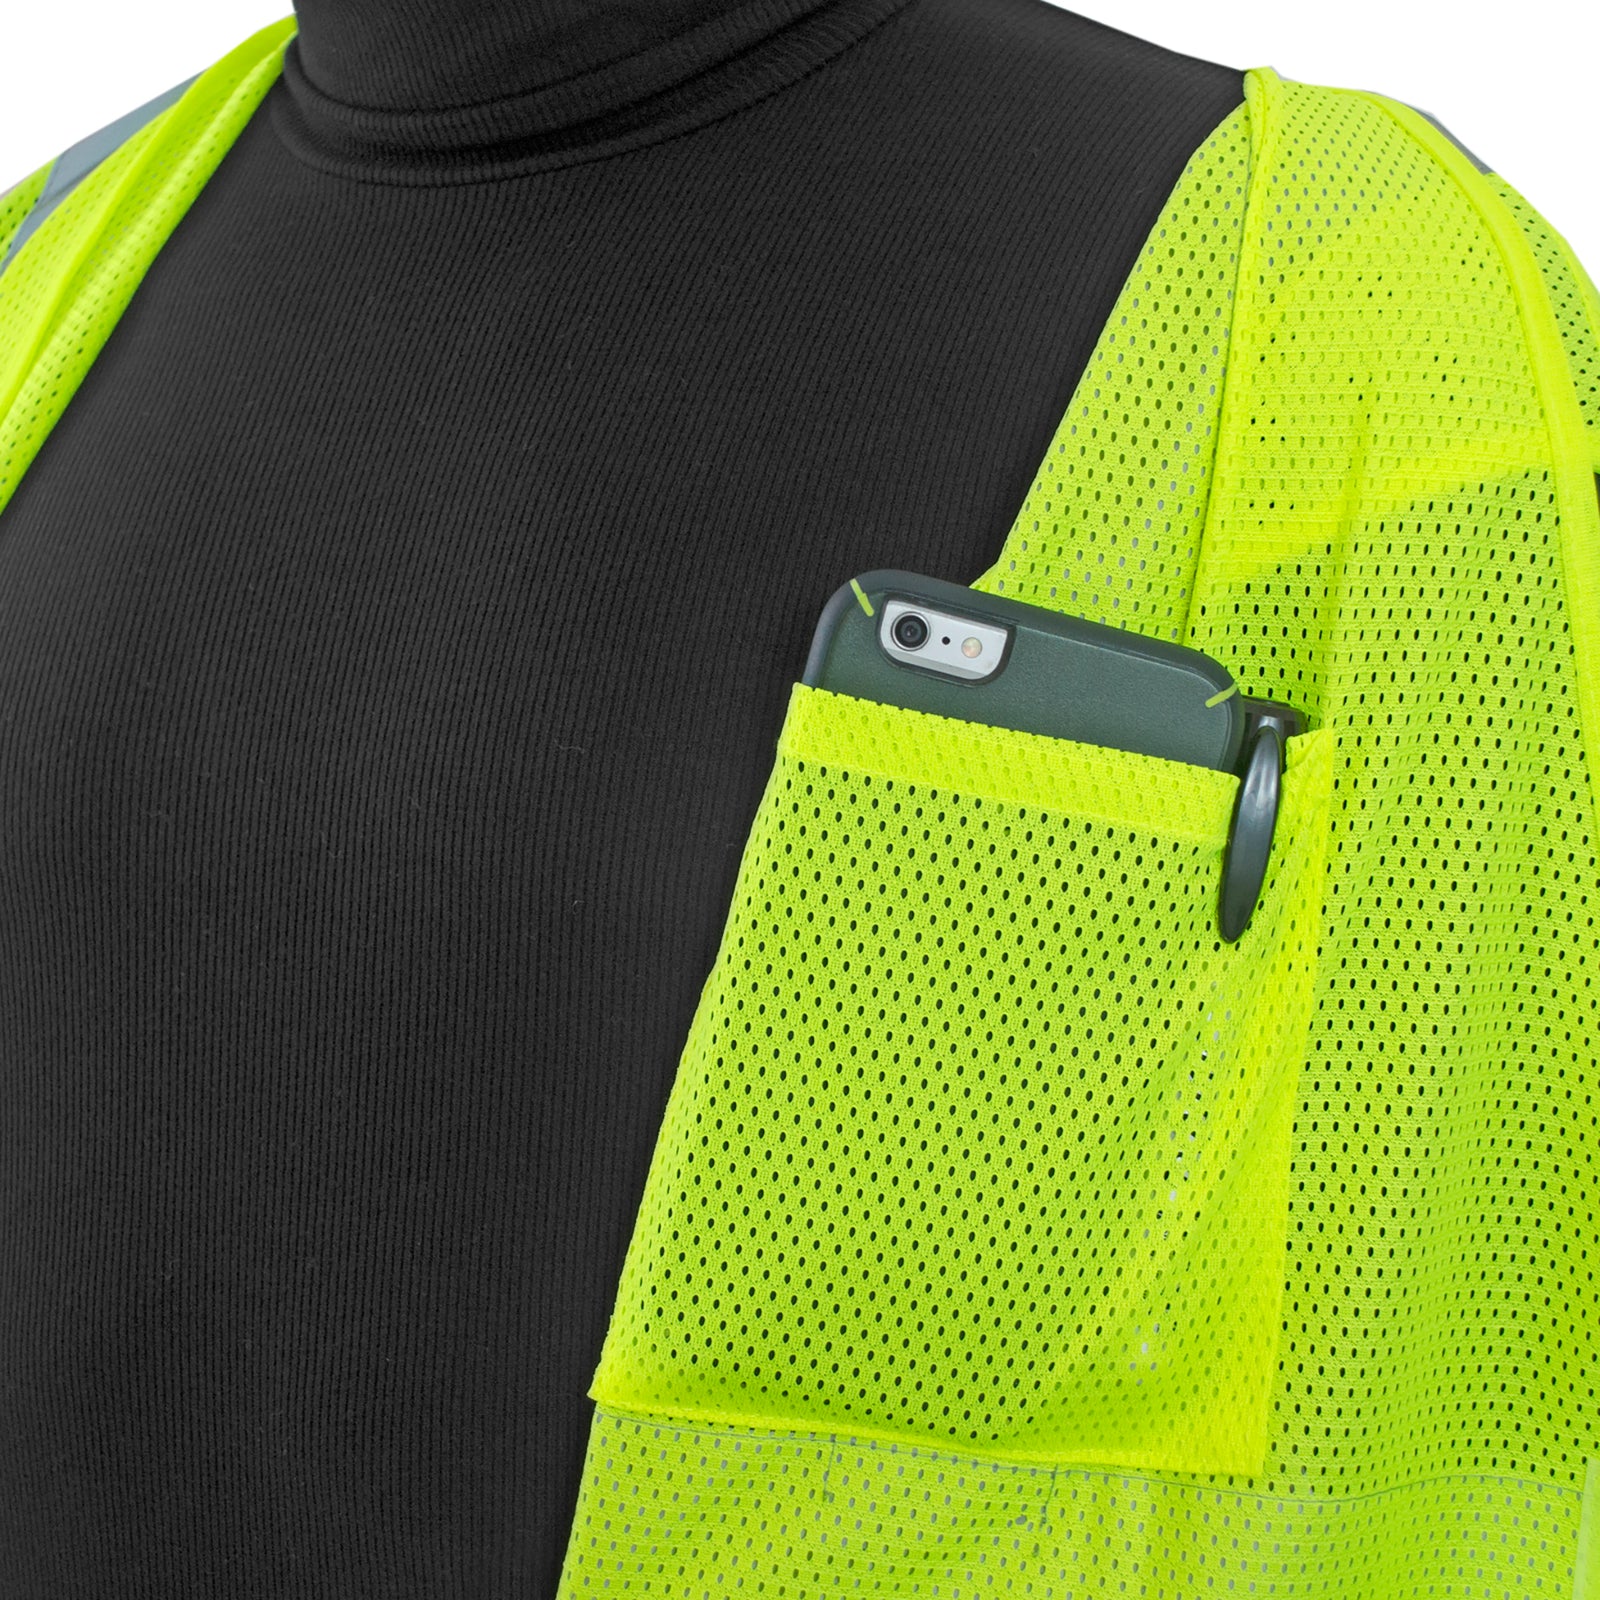 Close-up of the internal pocket of the JORESTECH safety vest shown with a mobile phone and a pen